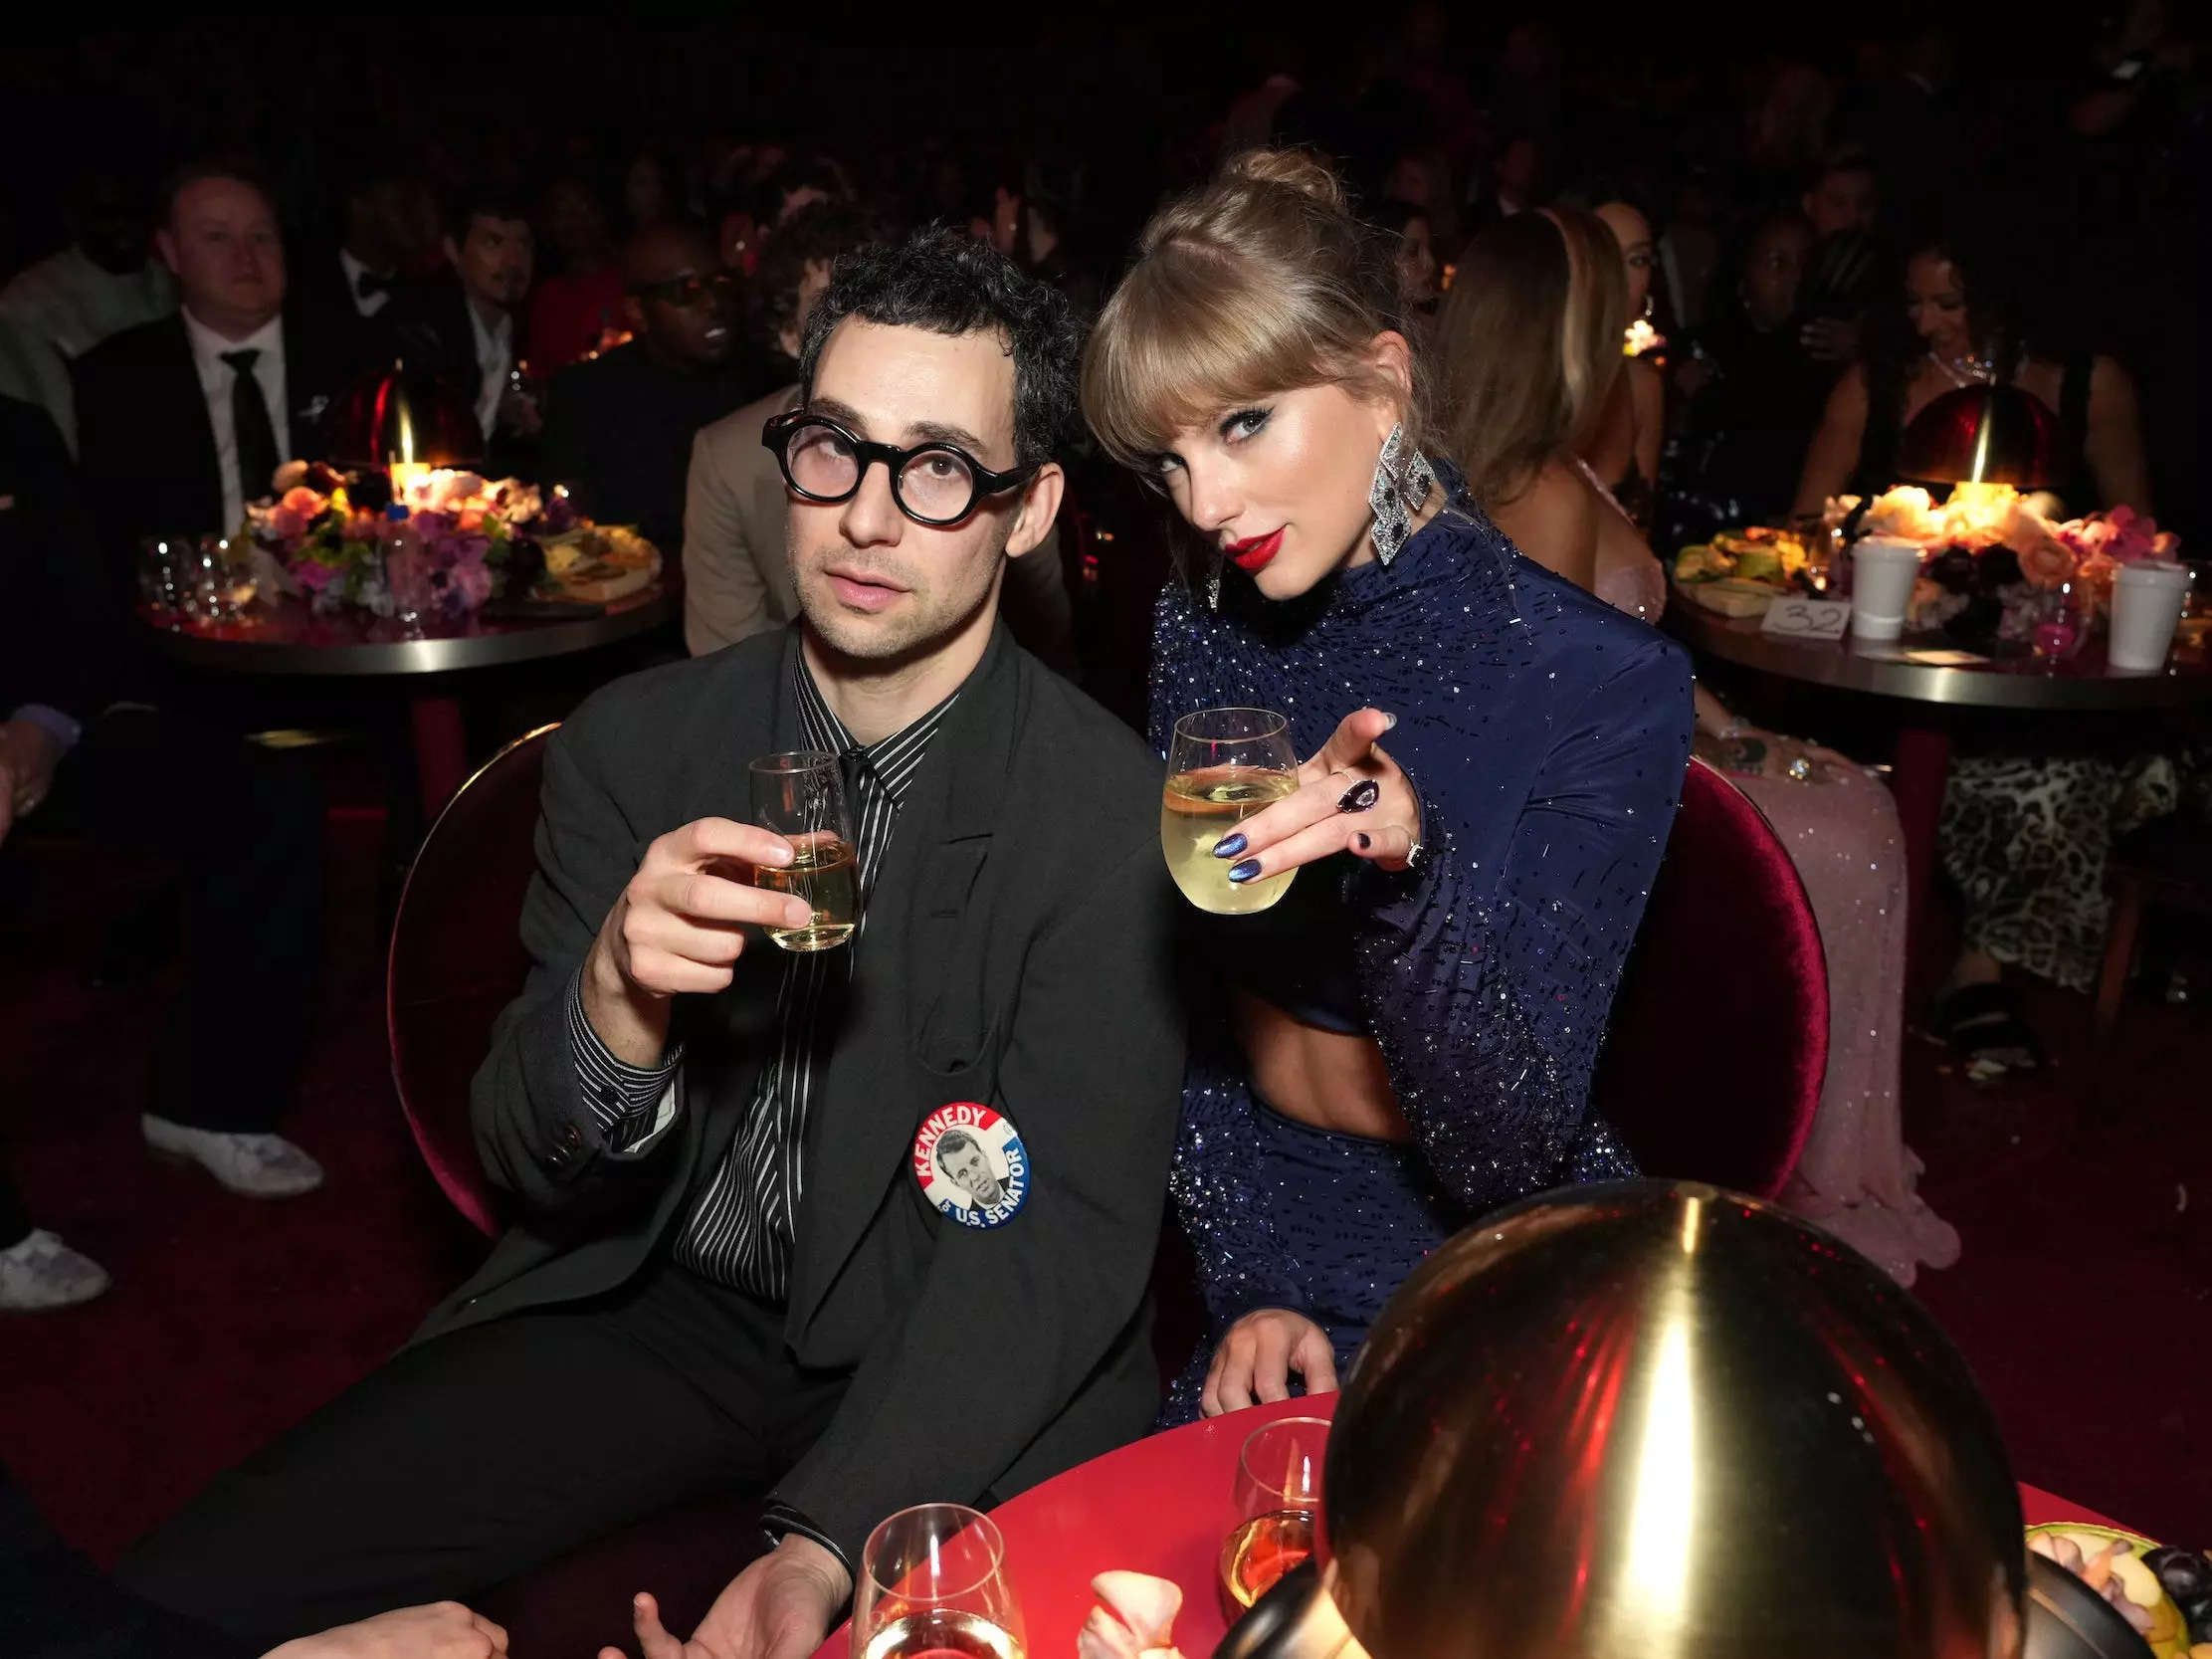 Taylor Swift (right) and longtime music collaborator Jack Antonoff toast to the camera during the 2023 Grammy Awards.